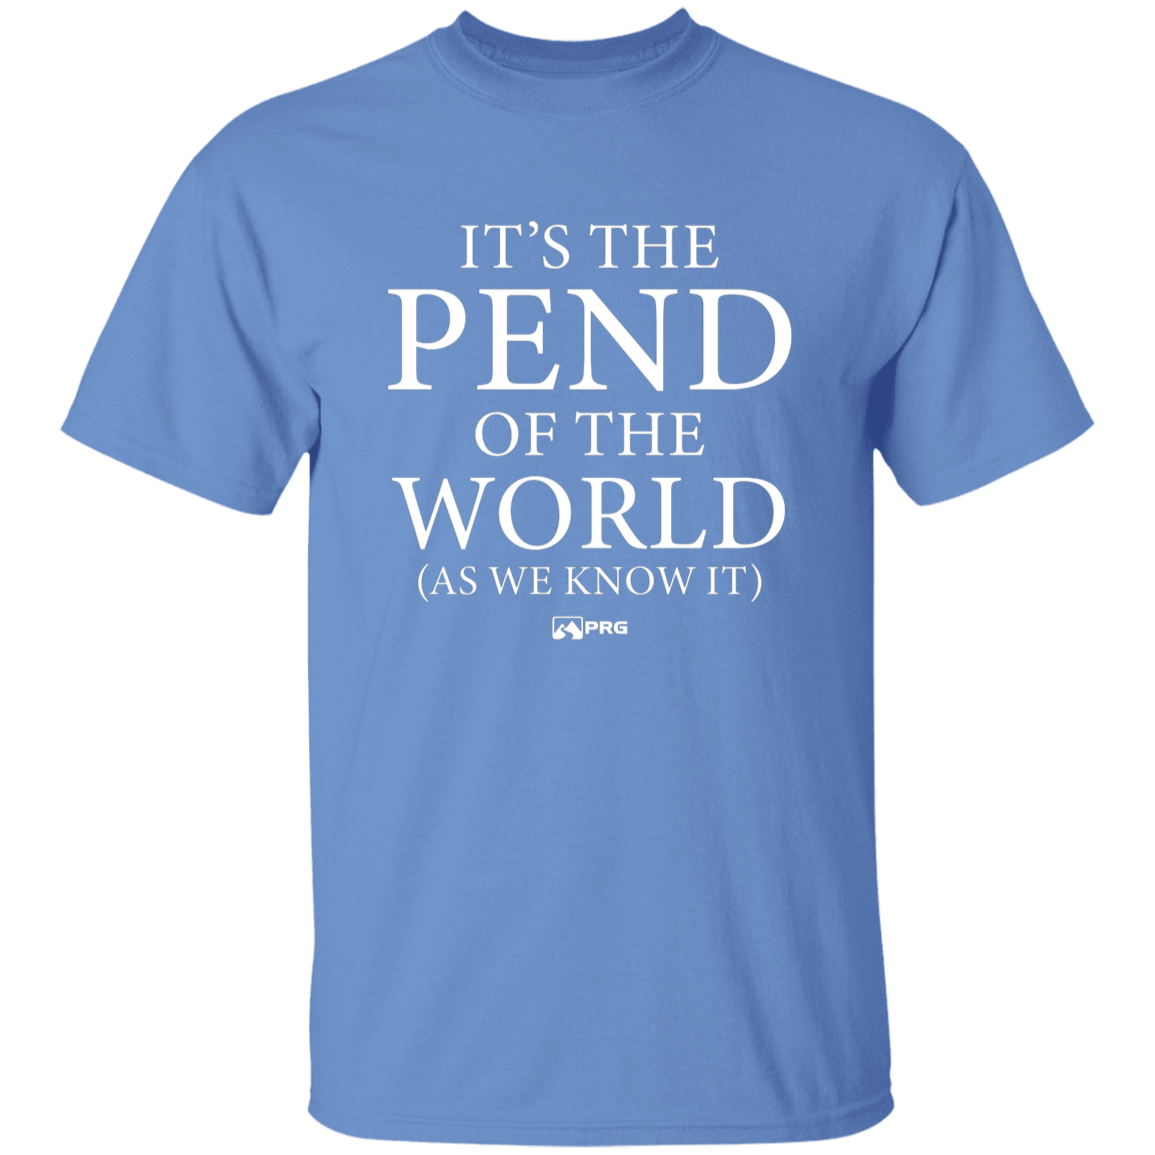 Pend of the World - Youth Shirt